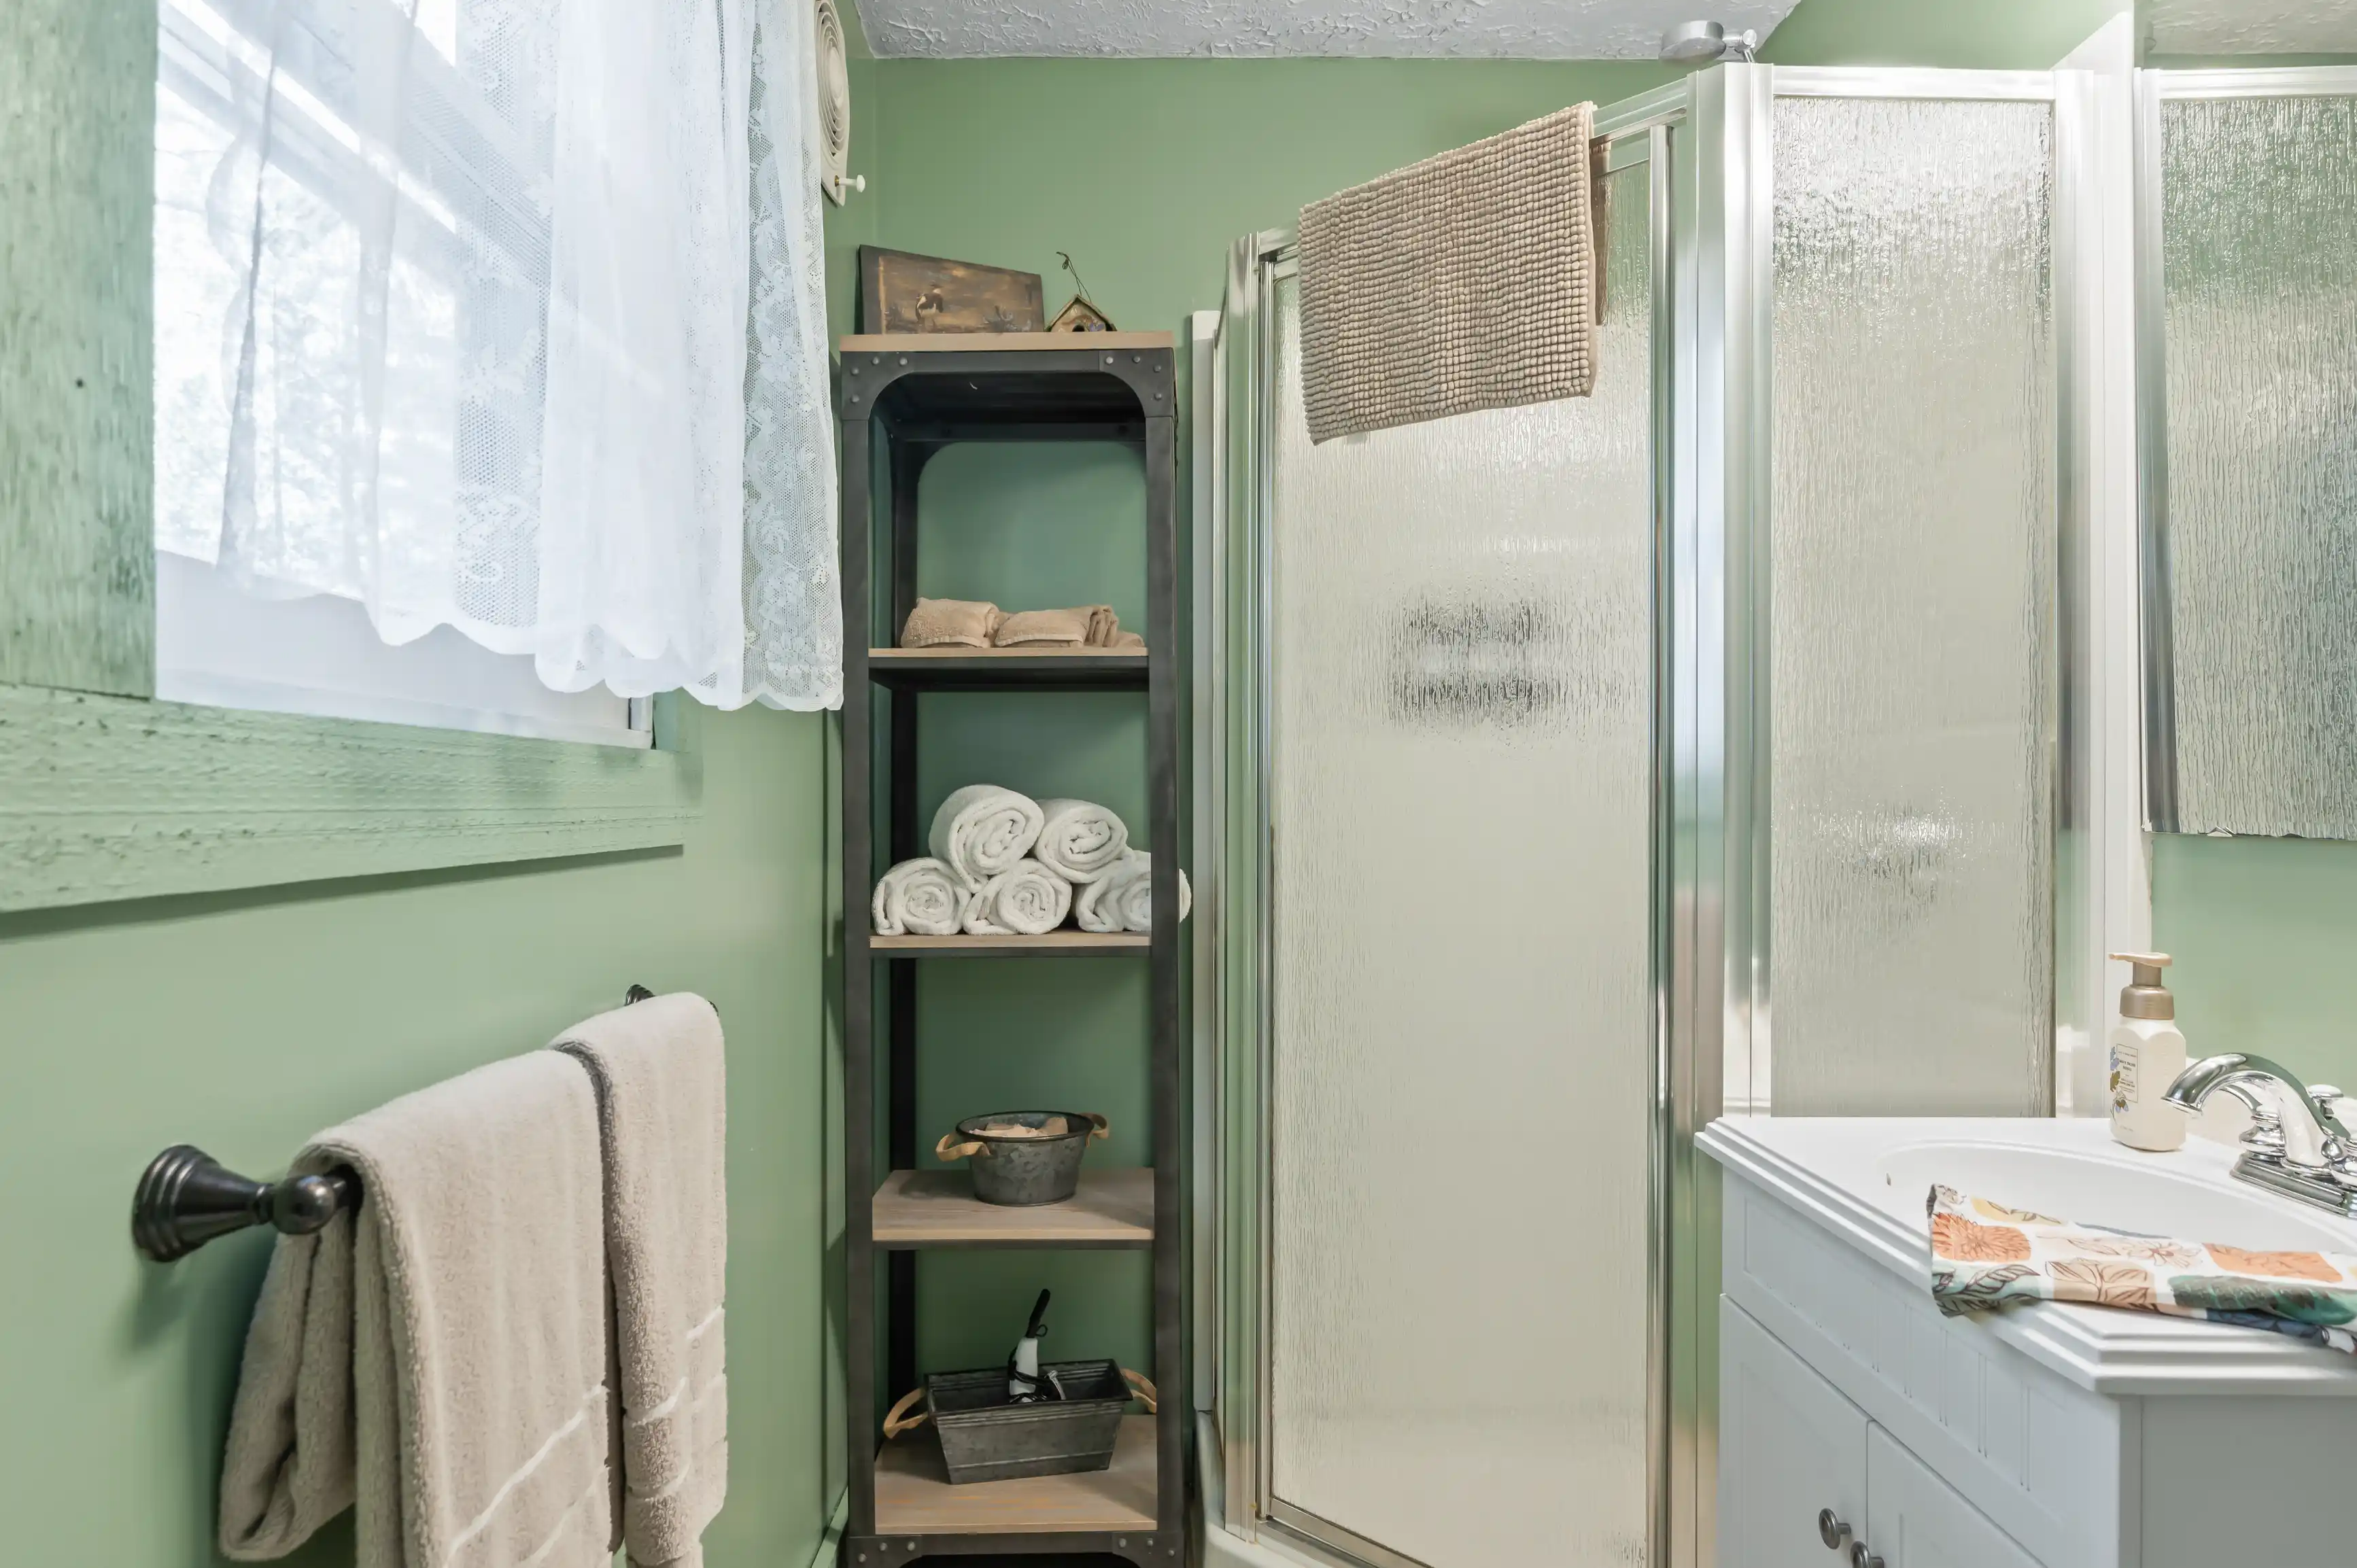 Bright bathroom with green walls, white fixtures, shower stall, and a wooden shelving unit with towels.